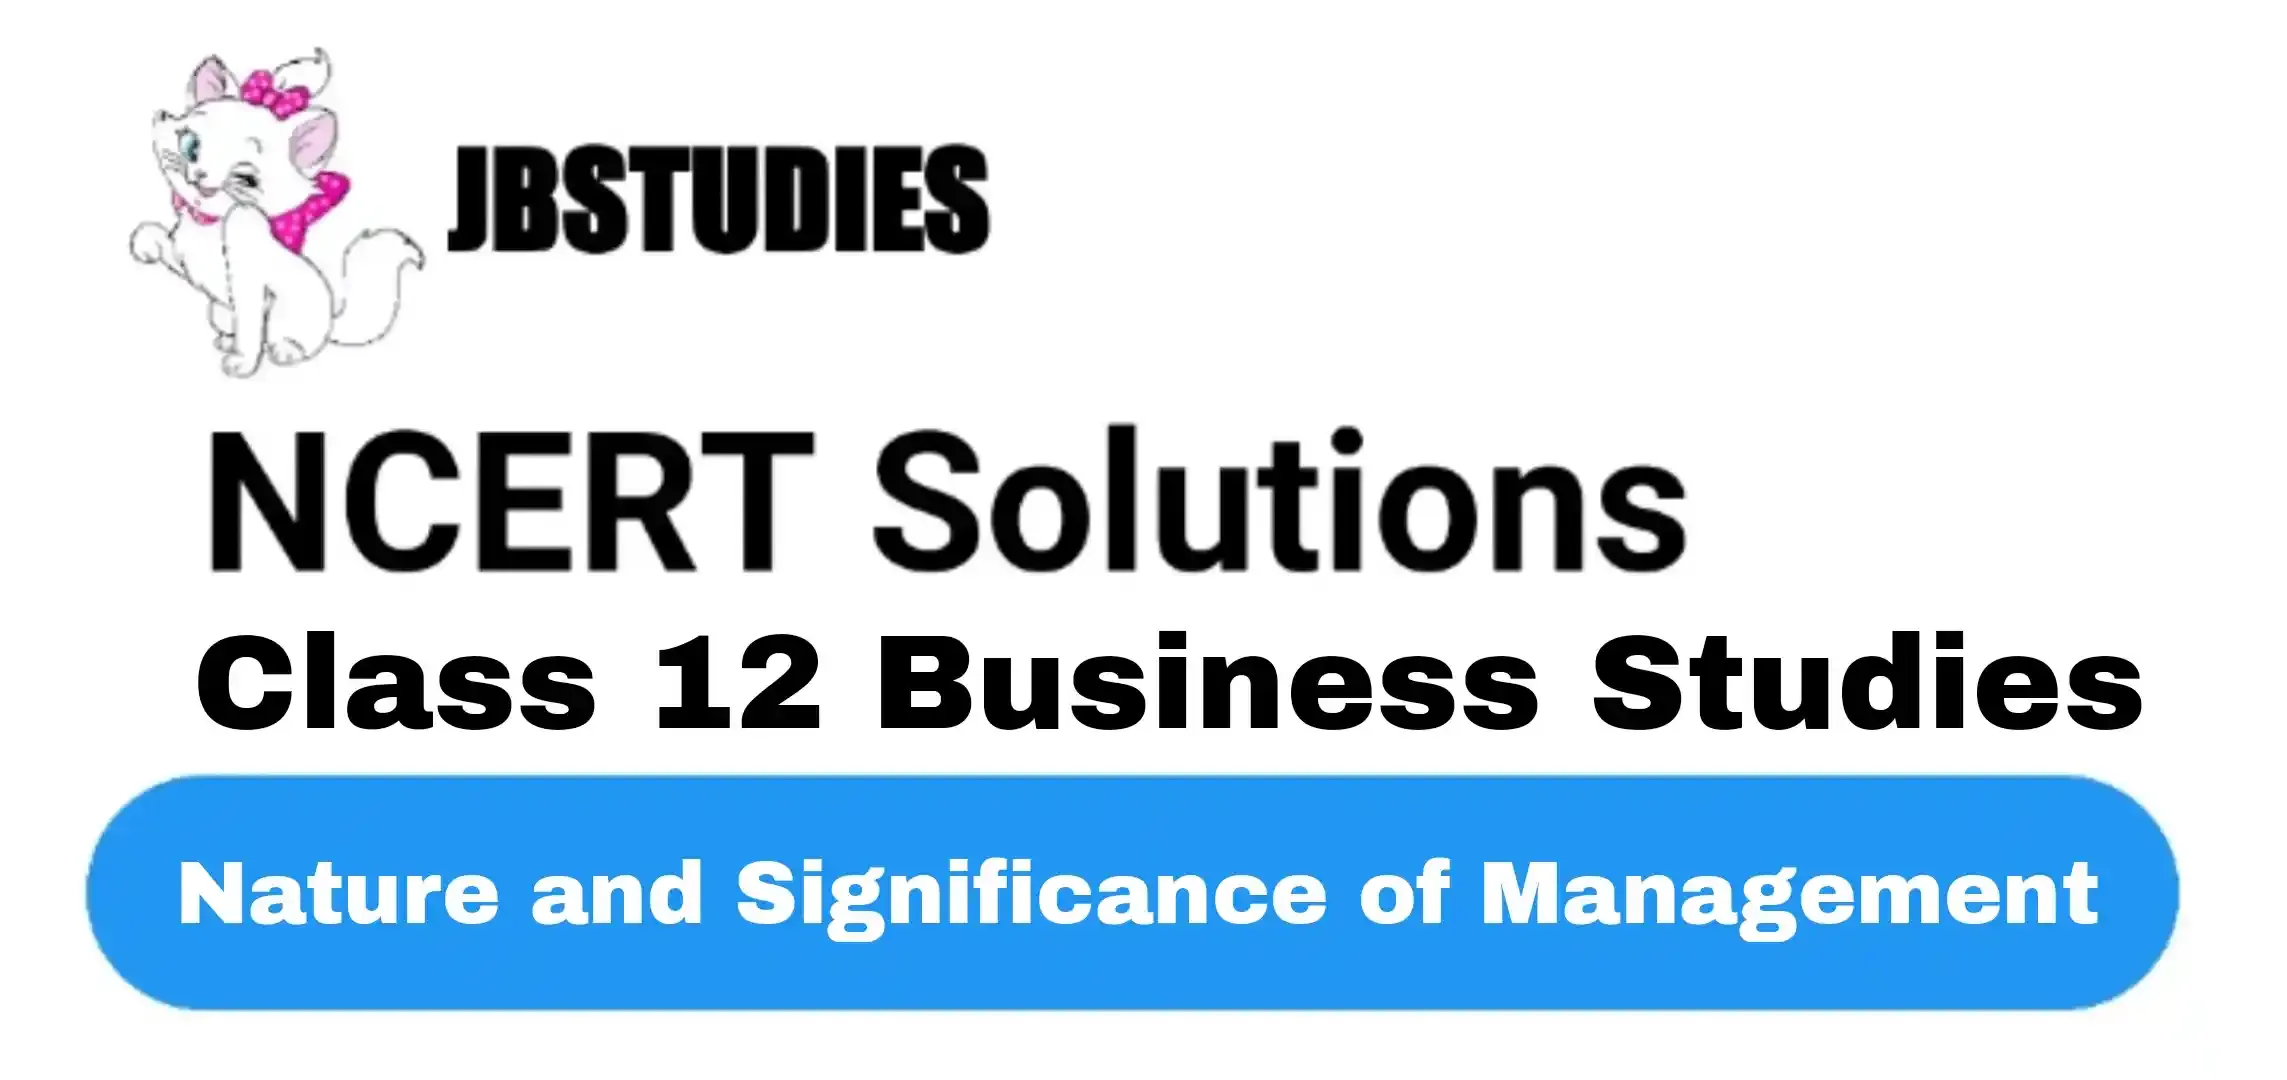 Solutions Class 12 Business Studies Chapter -1 (Nature and Significance of Management)